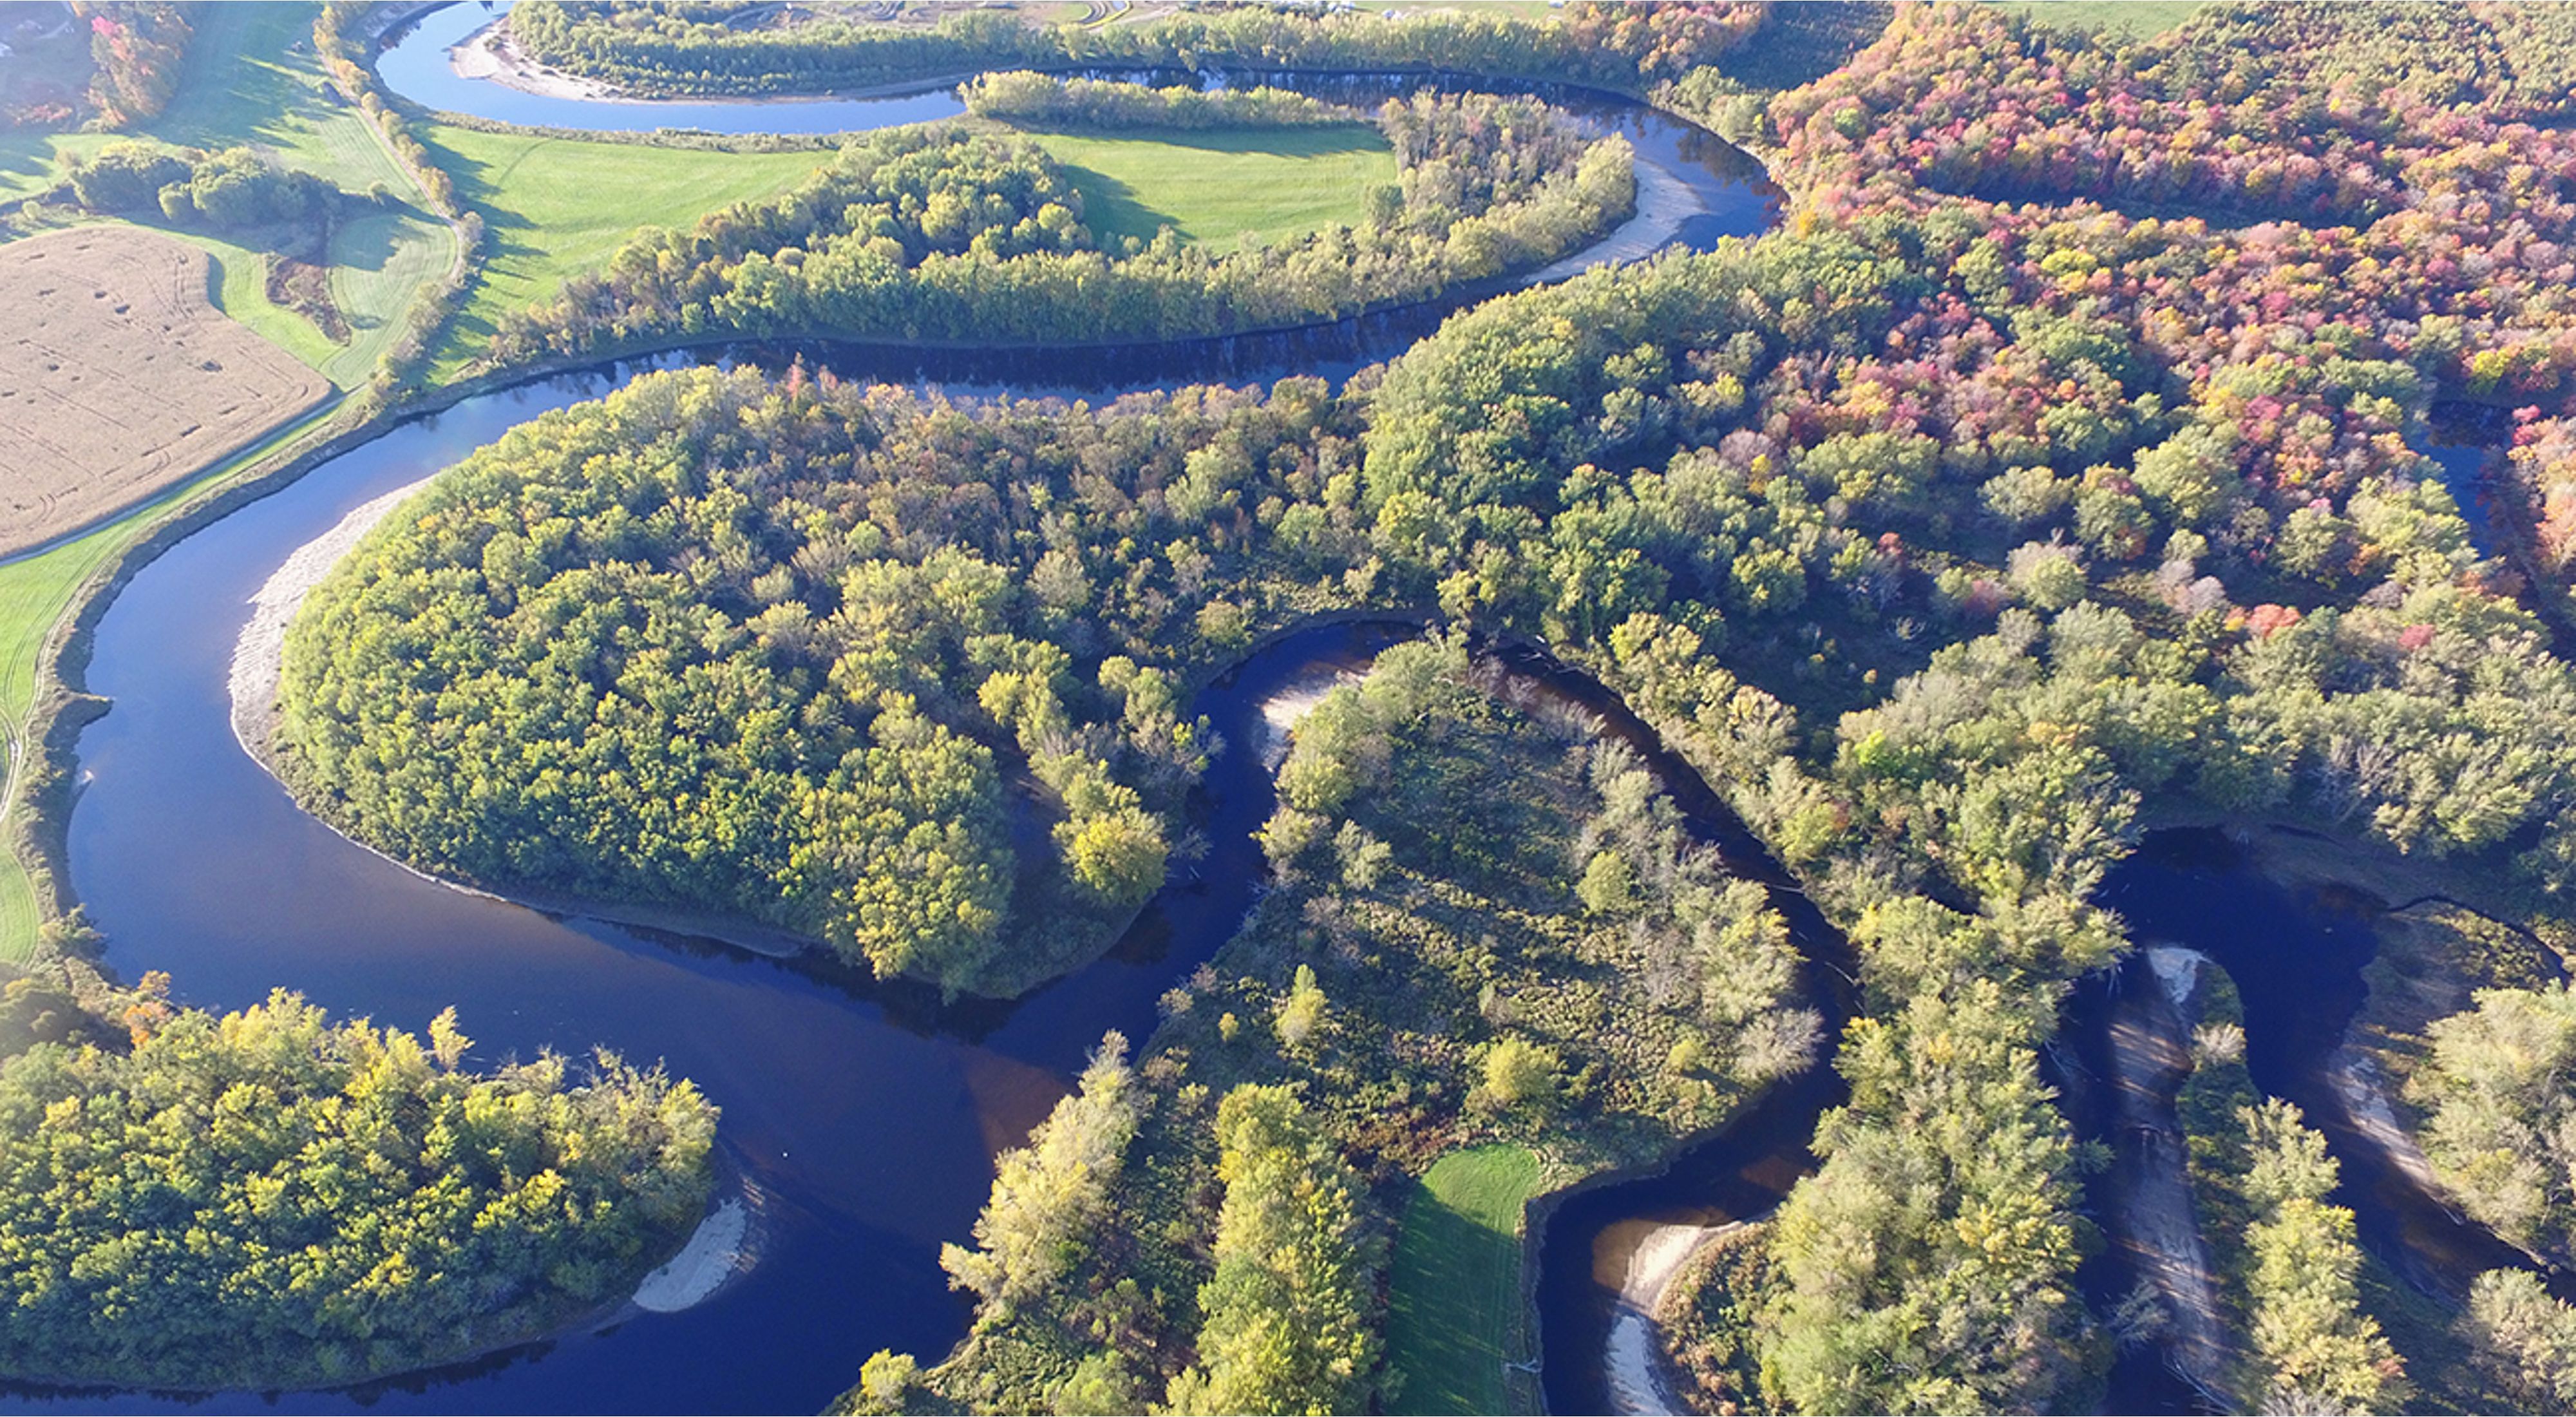 An aerial view of a river winding through a forested landscape.